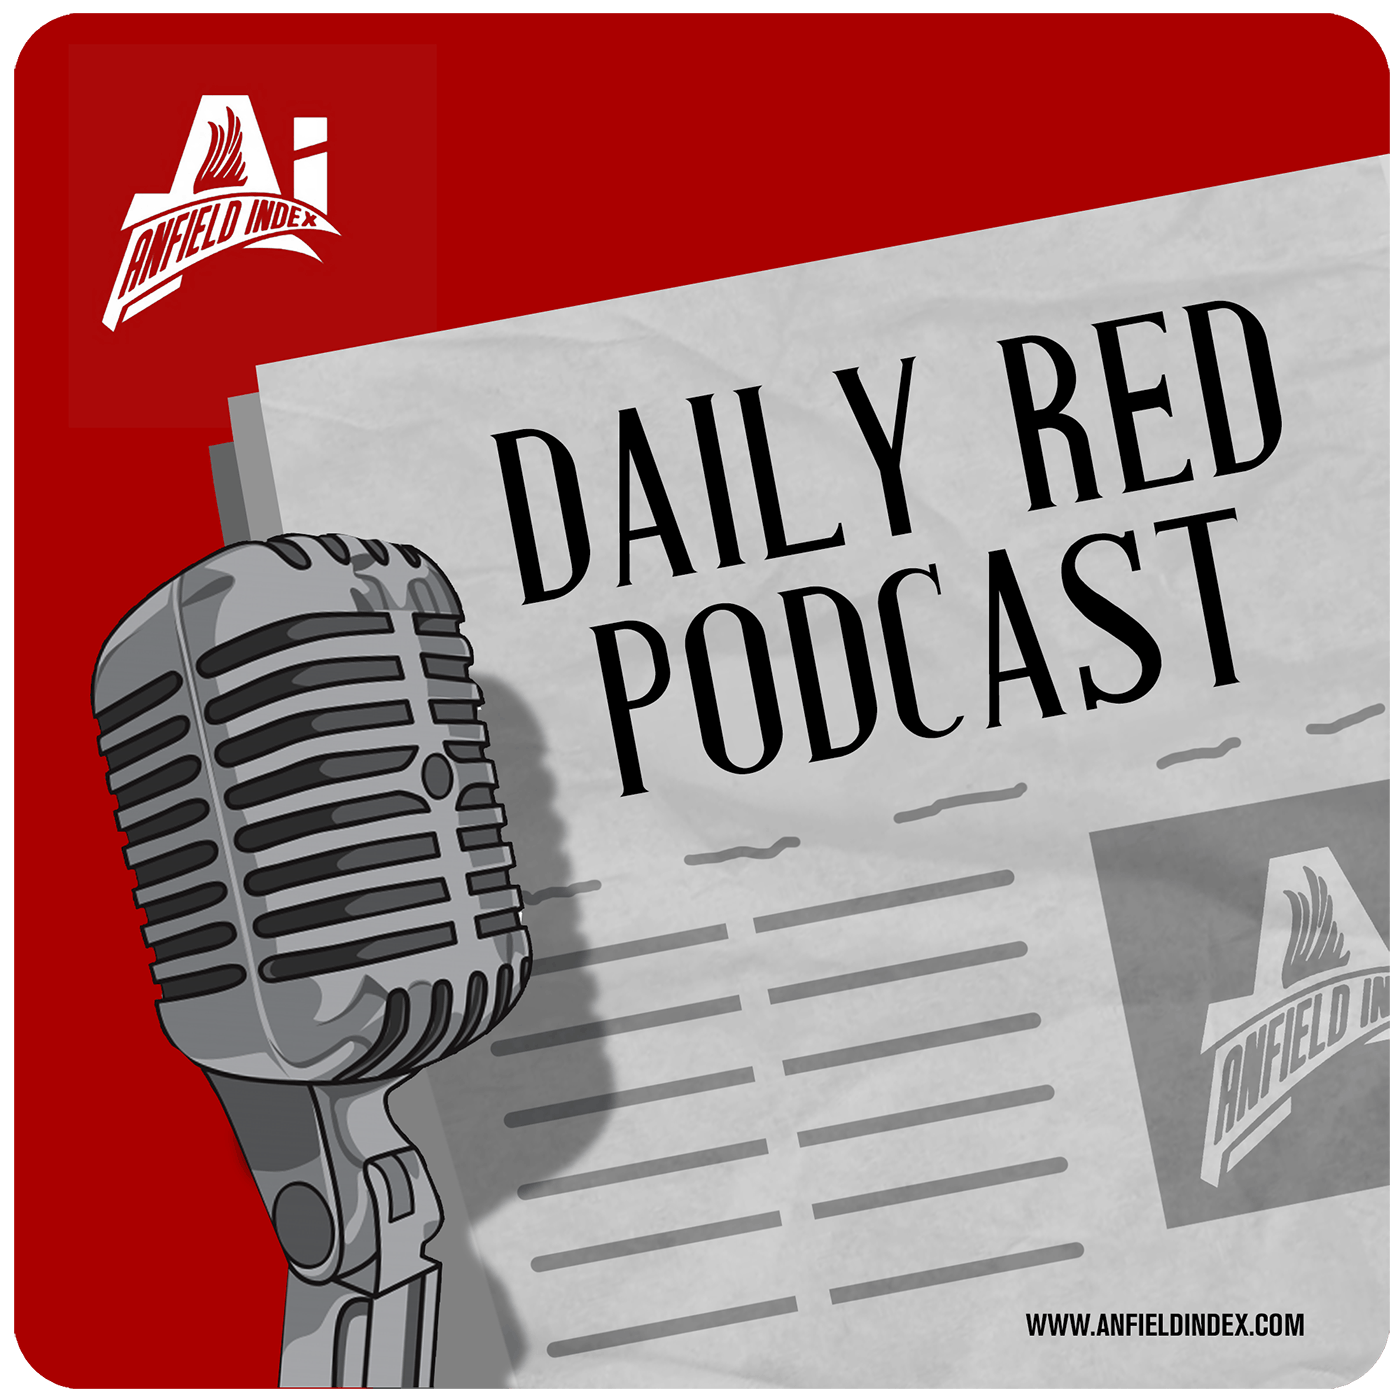 Brentford, Injuries & Only Mo - Daily Red Podcast